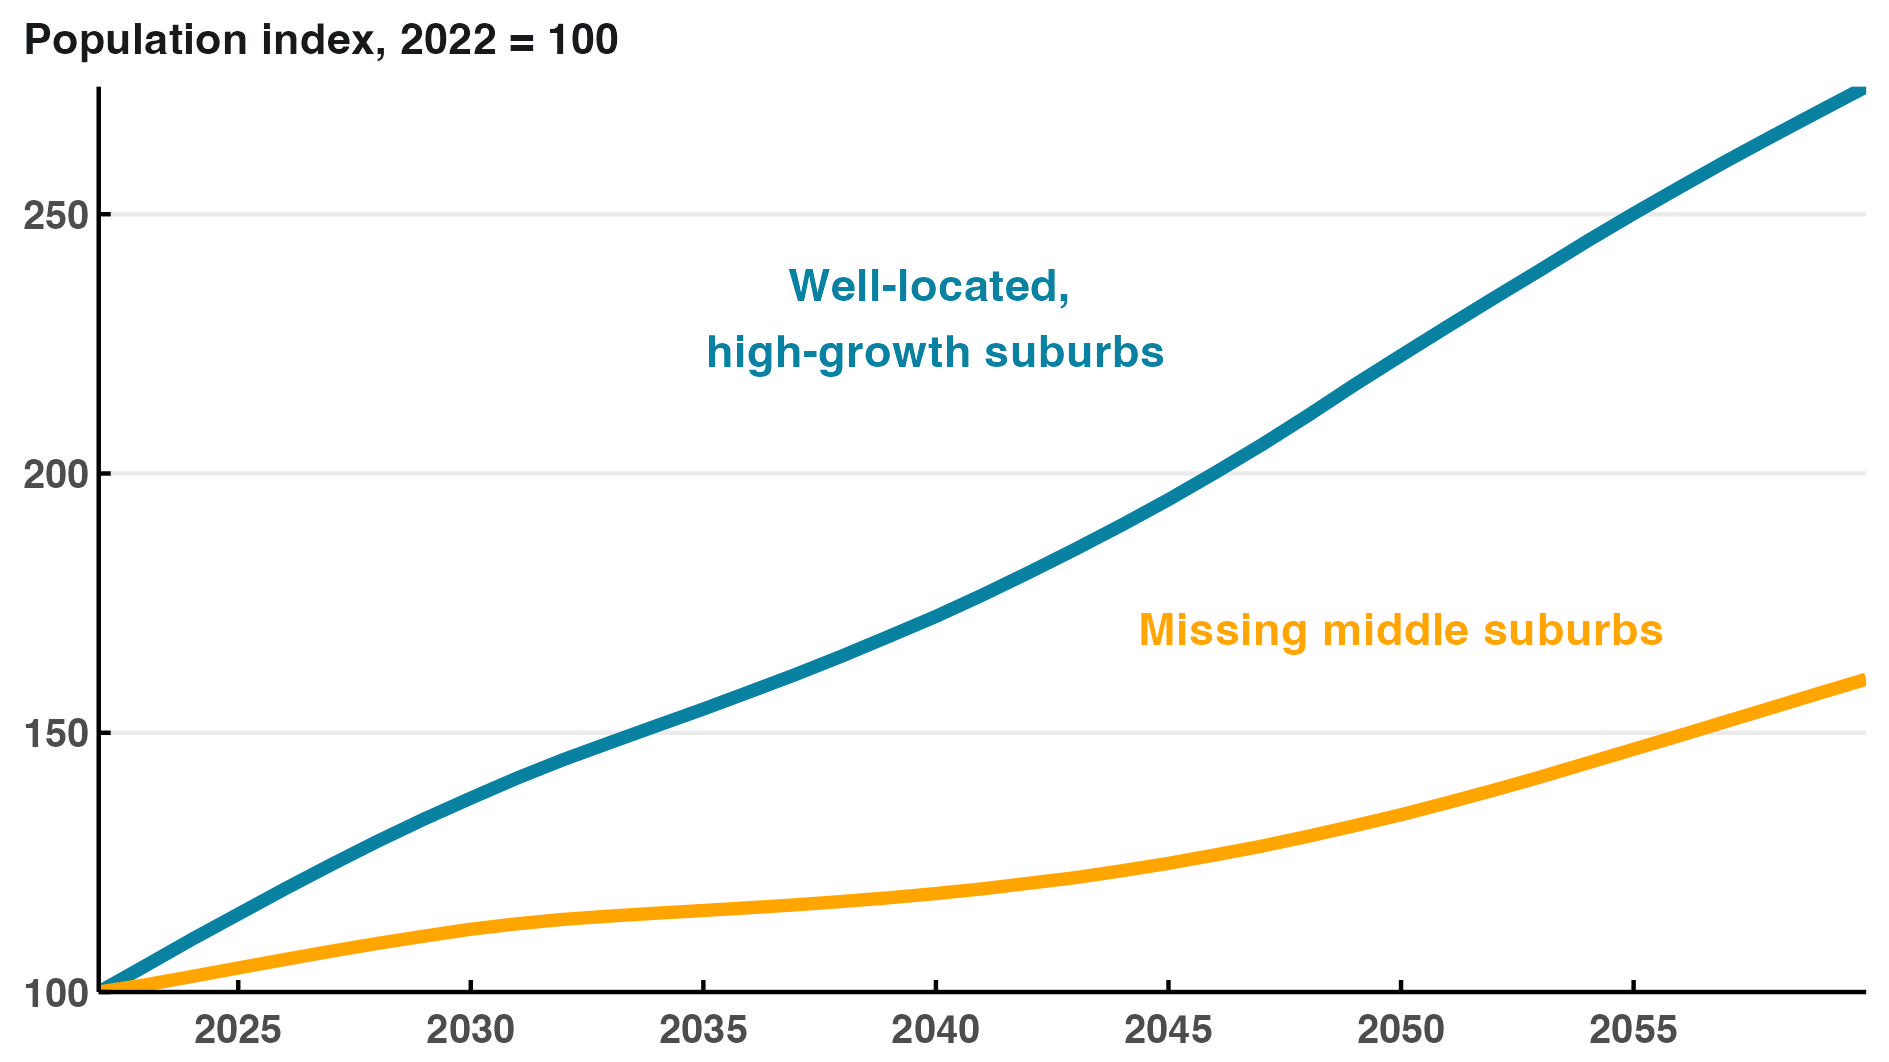 Chart showing population growth of missing middle suburbs is projected to be significantly lower than many similarly well-located suburbs out to 2060.